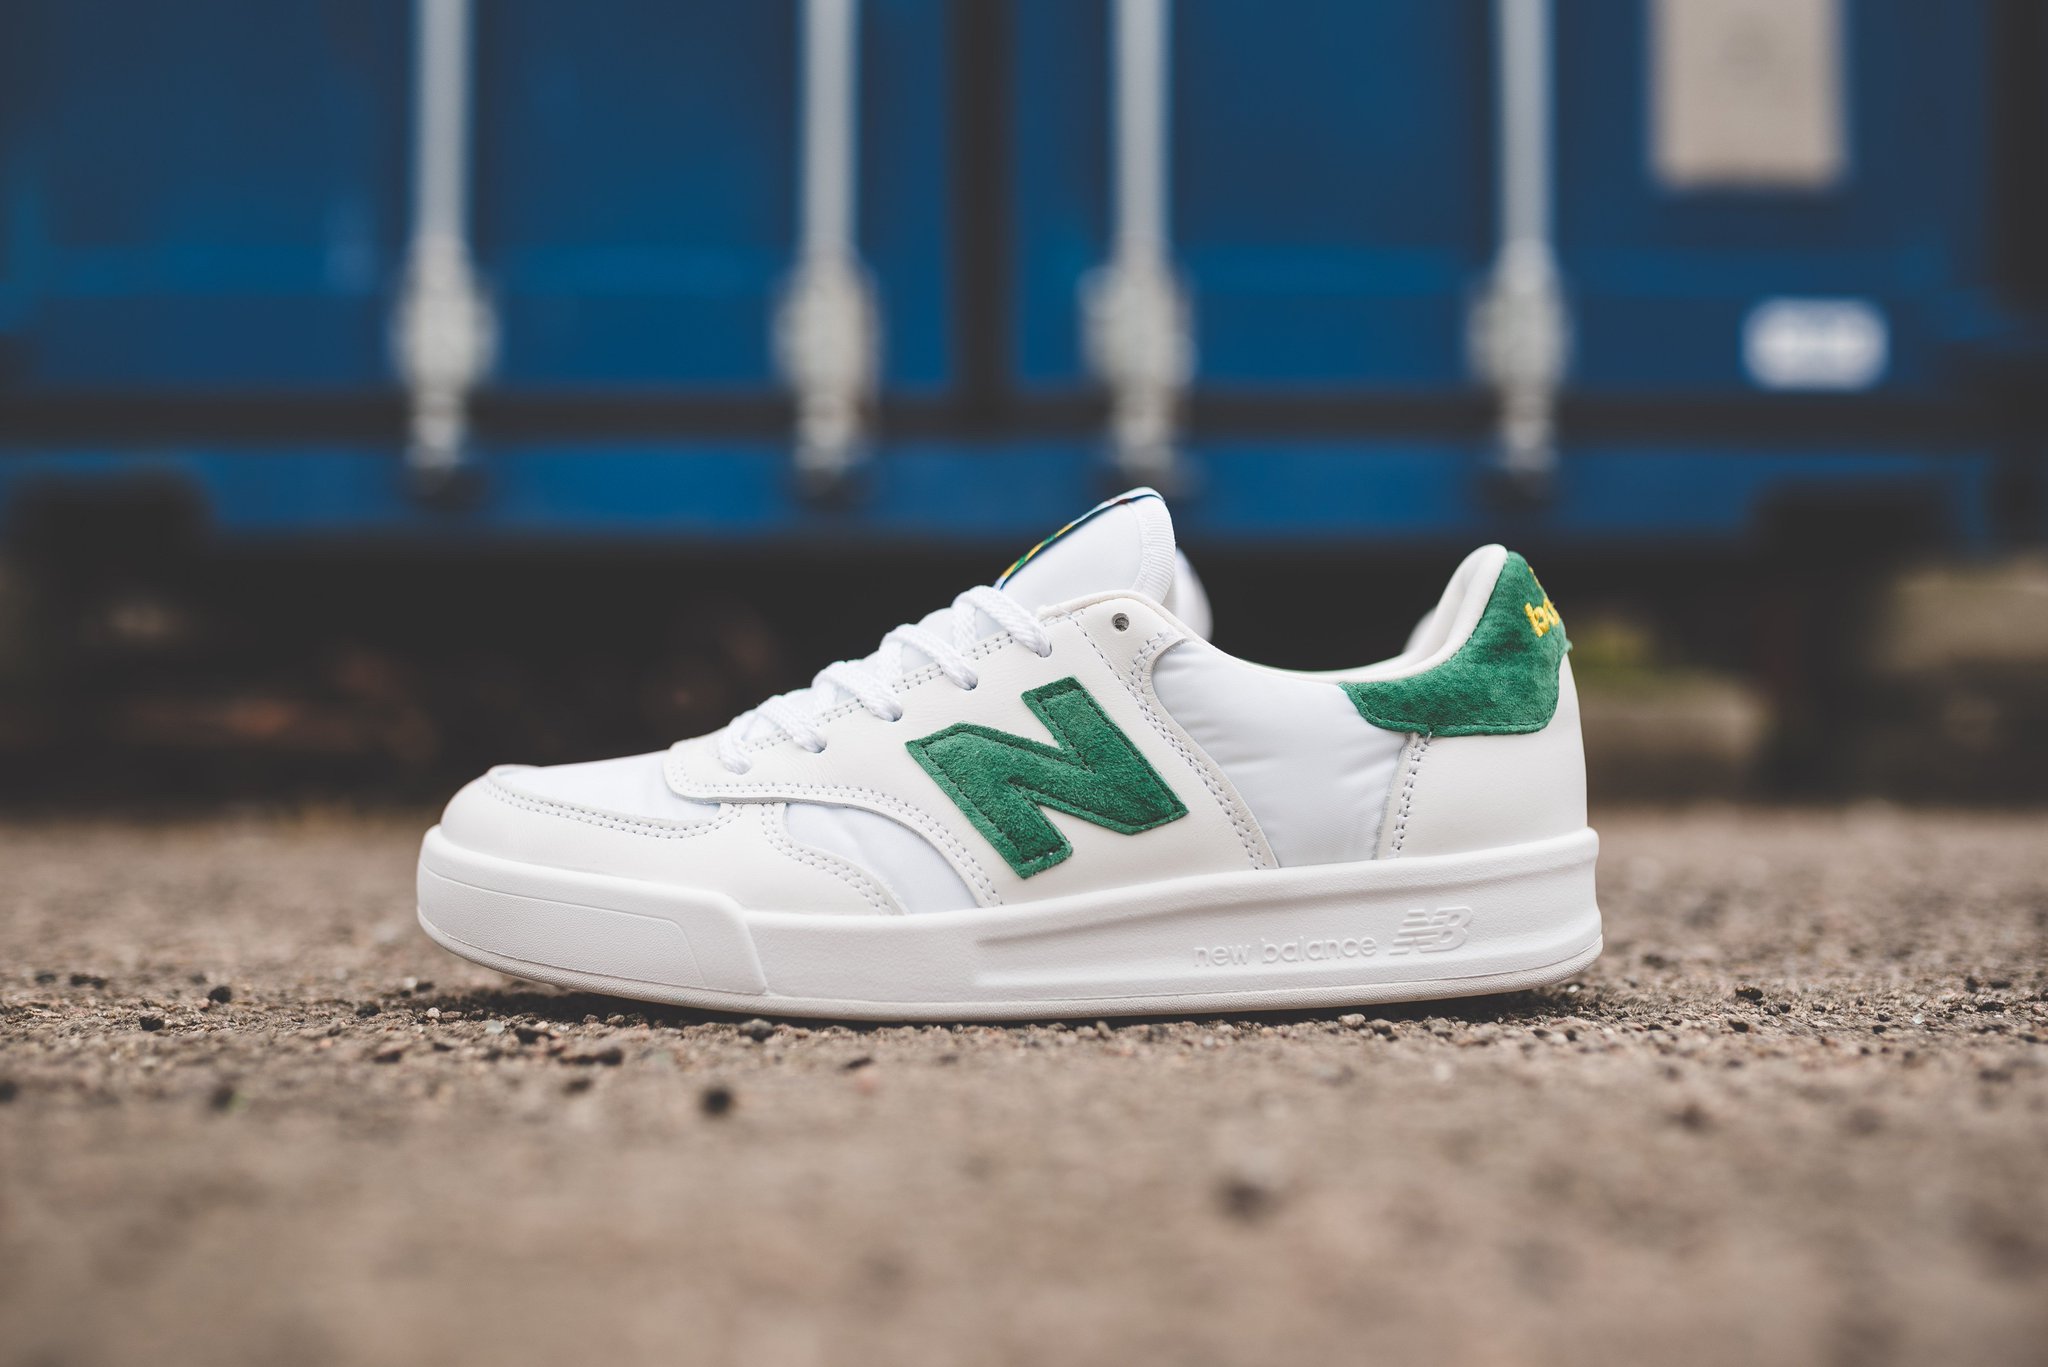 HANON Twitter: "Made in UK New Balance CT300 "Cumbrian is available to buy ONLINE now! #newbalance #cumbrianpack https://t.co/mikQGNNFpJ / Twitter